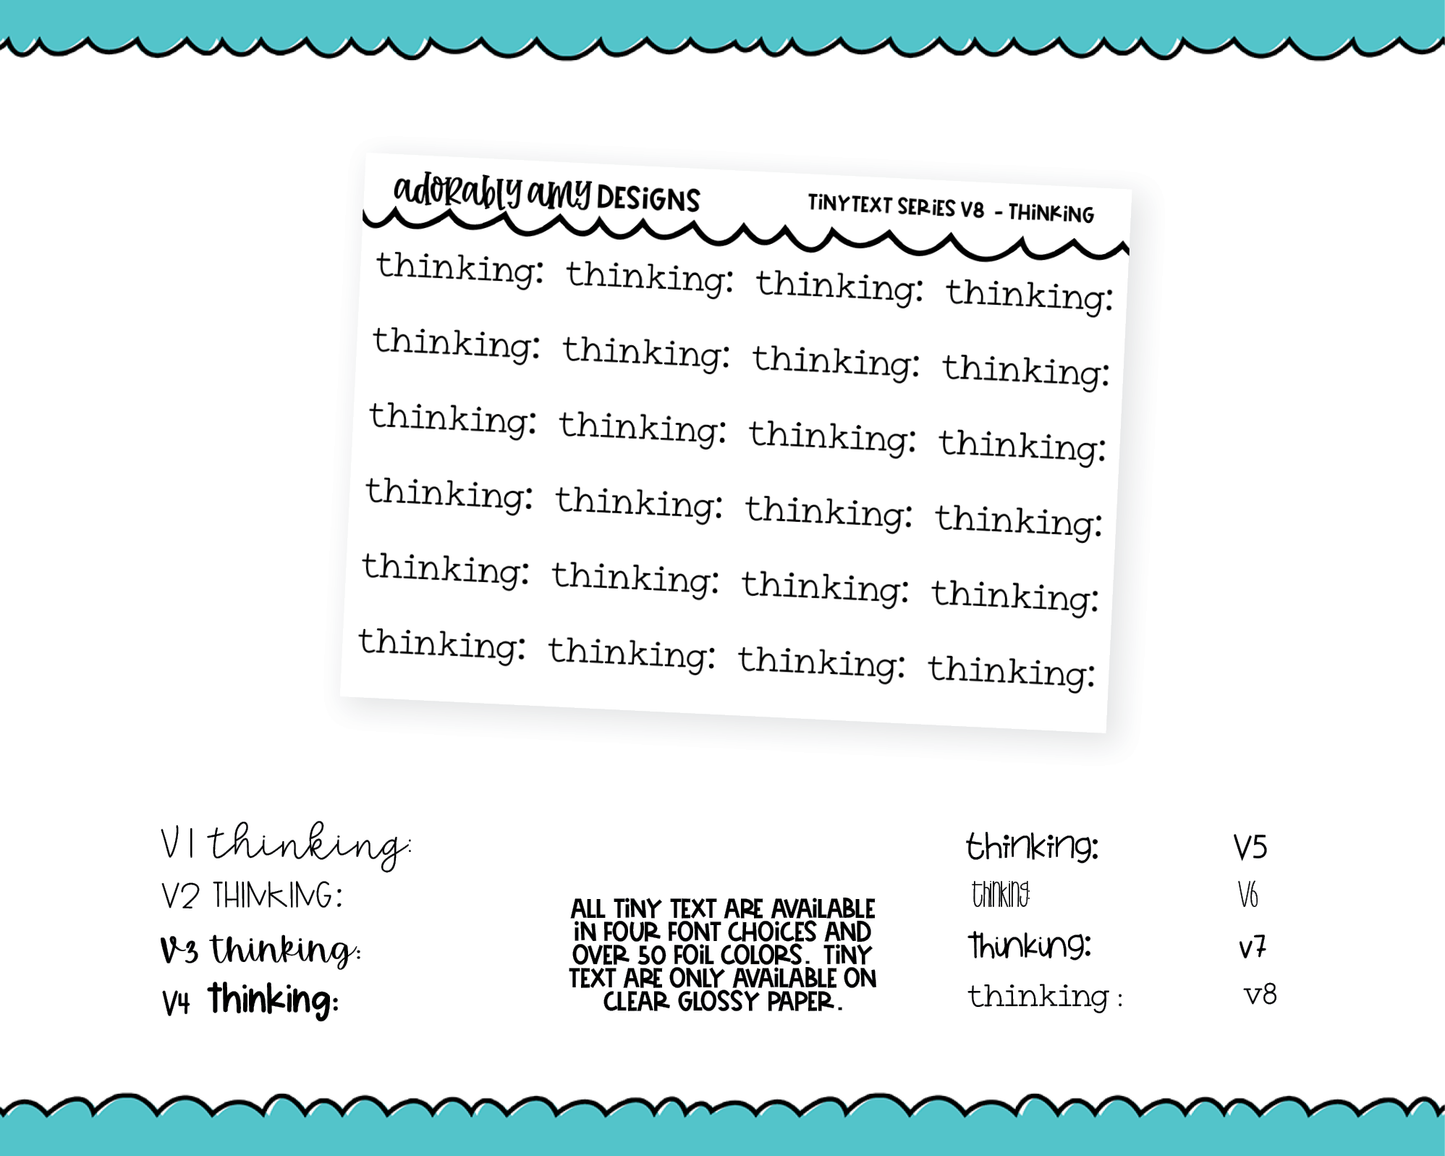 Foiled Tiny Text Series - Thinking Checklist Size Planner Stickers for any Planner or Insert